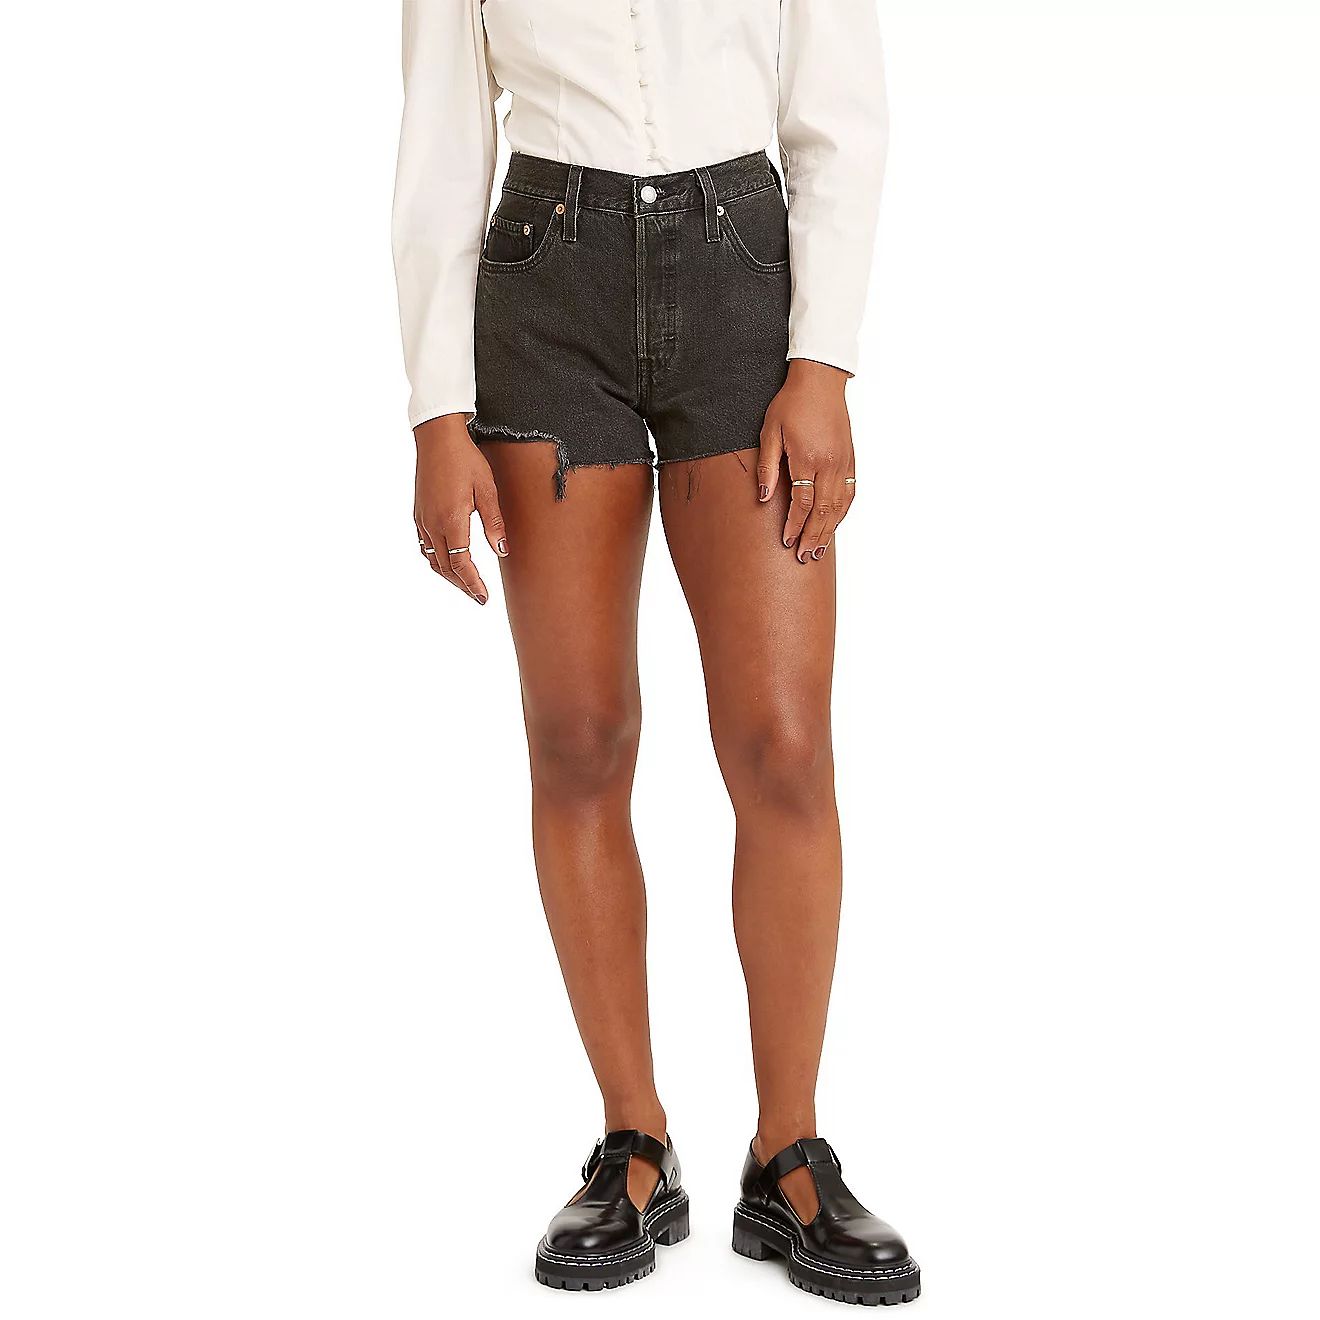 Levi's Women's 501 Original High Rise Shorts 2.5 in | Academy | Academy Sports + Outdoors